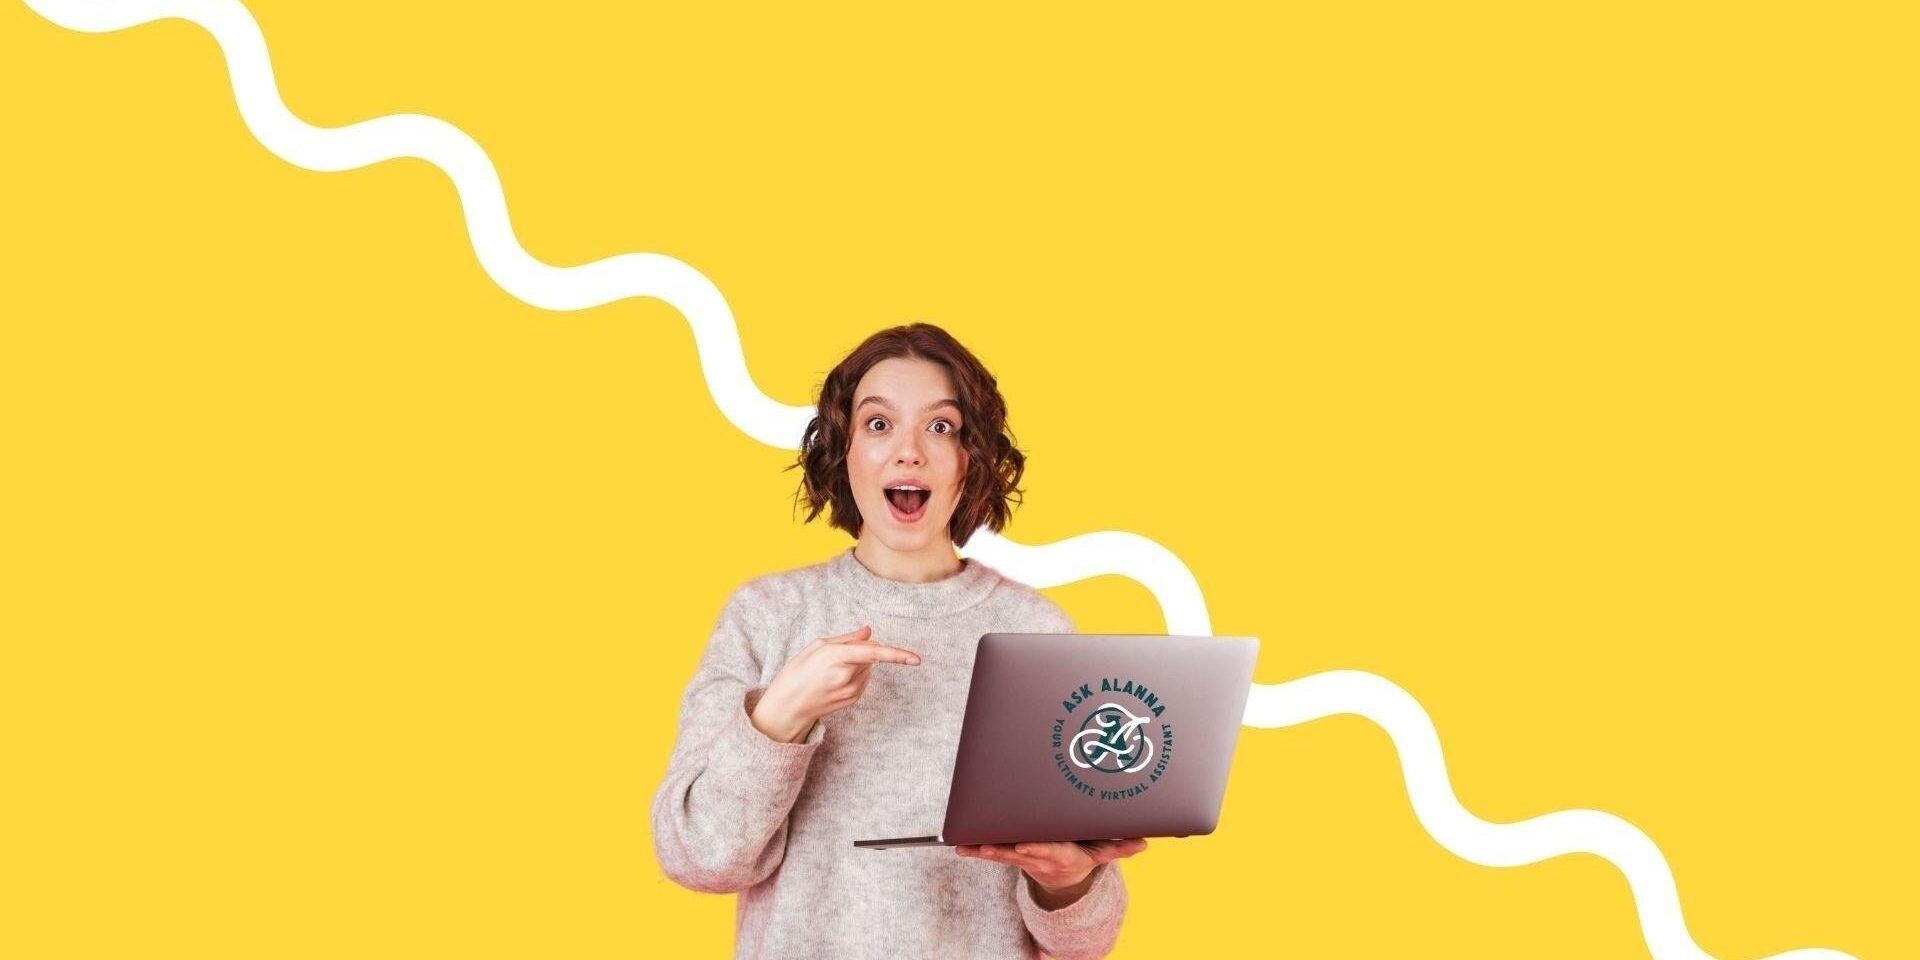 yellow background. foreground woman holding a laptop with the Ask Alanna logo on it, pointing to the laptop. Ask Alanna.